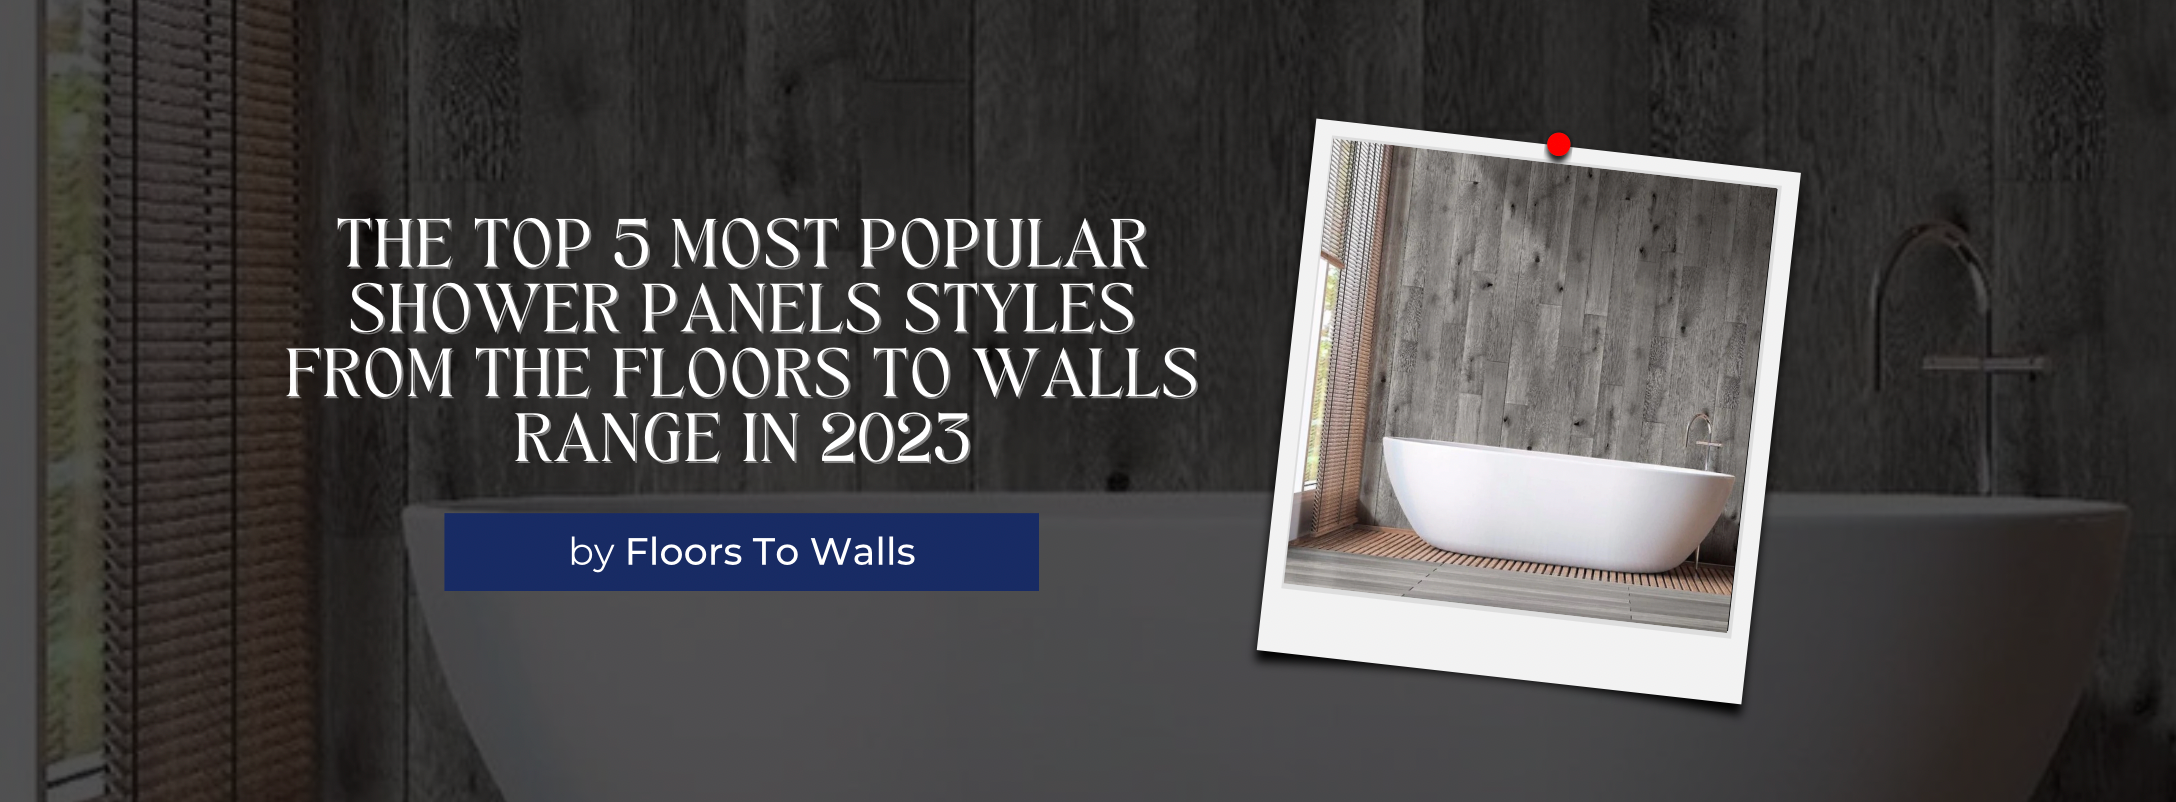 The Top 5 Most Popular Shower Panels Styles from the Floors To Walls Range in 2023